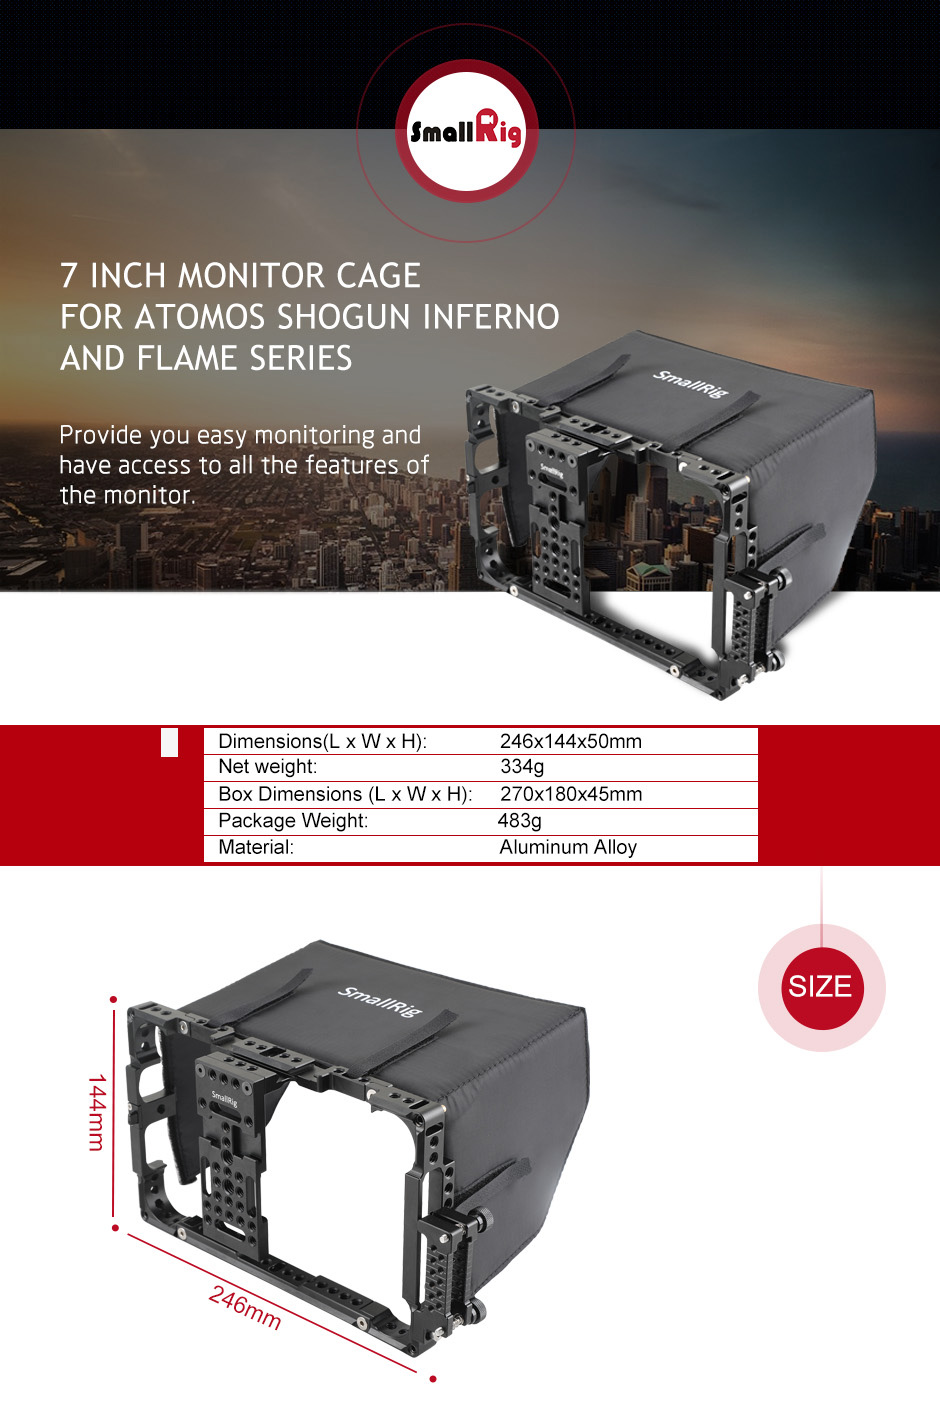 7 inch monitor cage